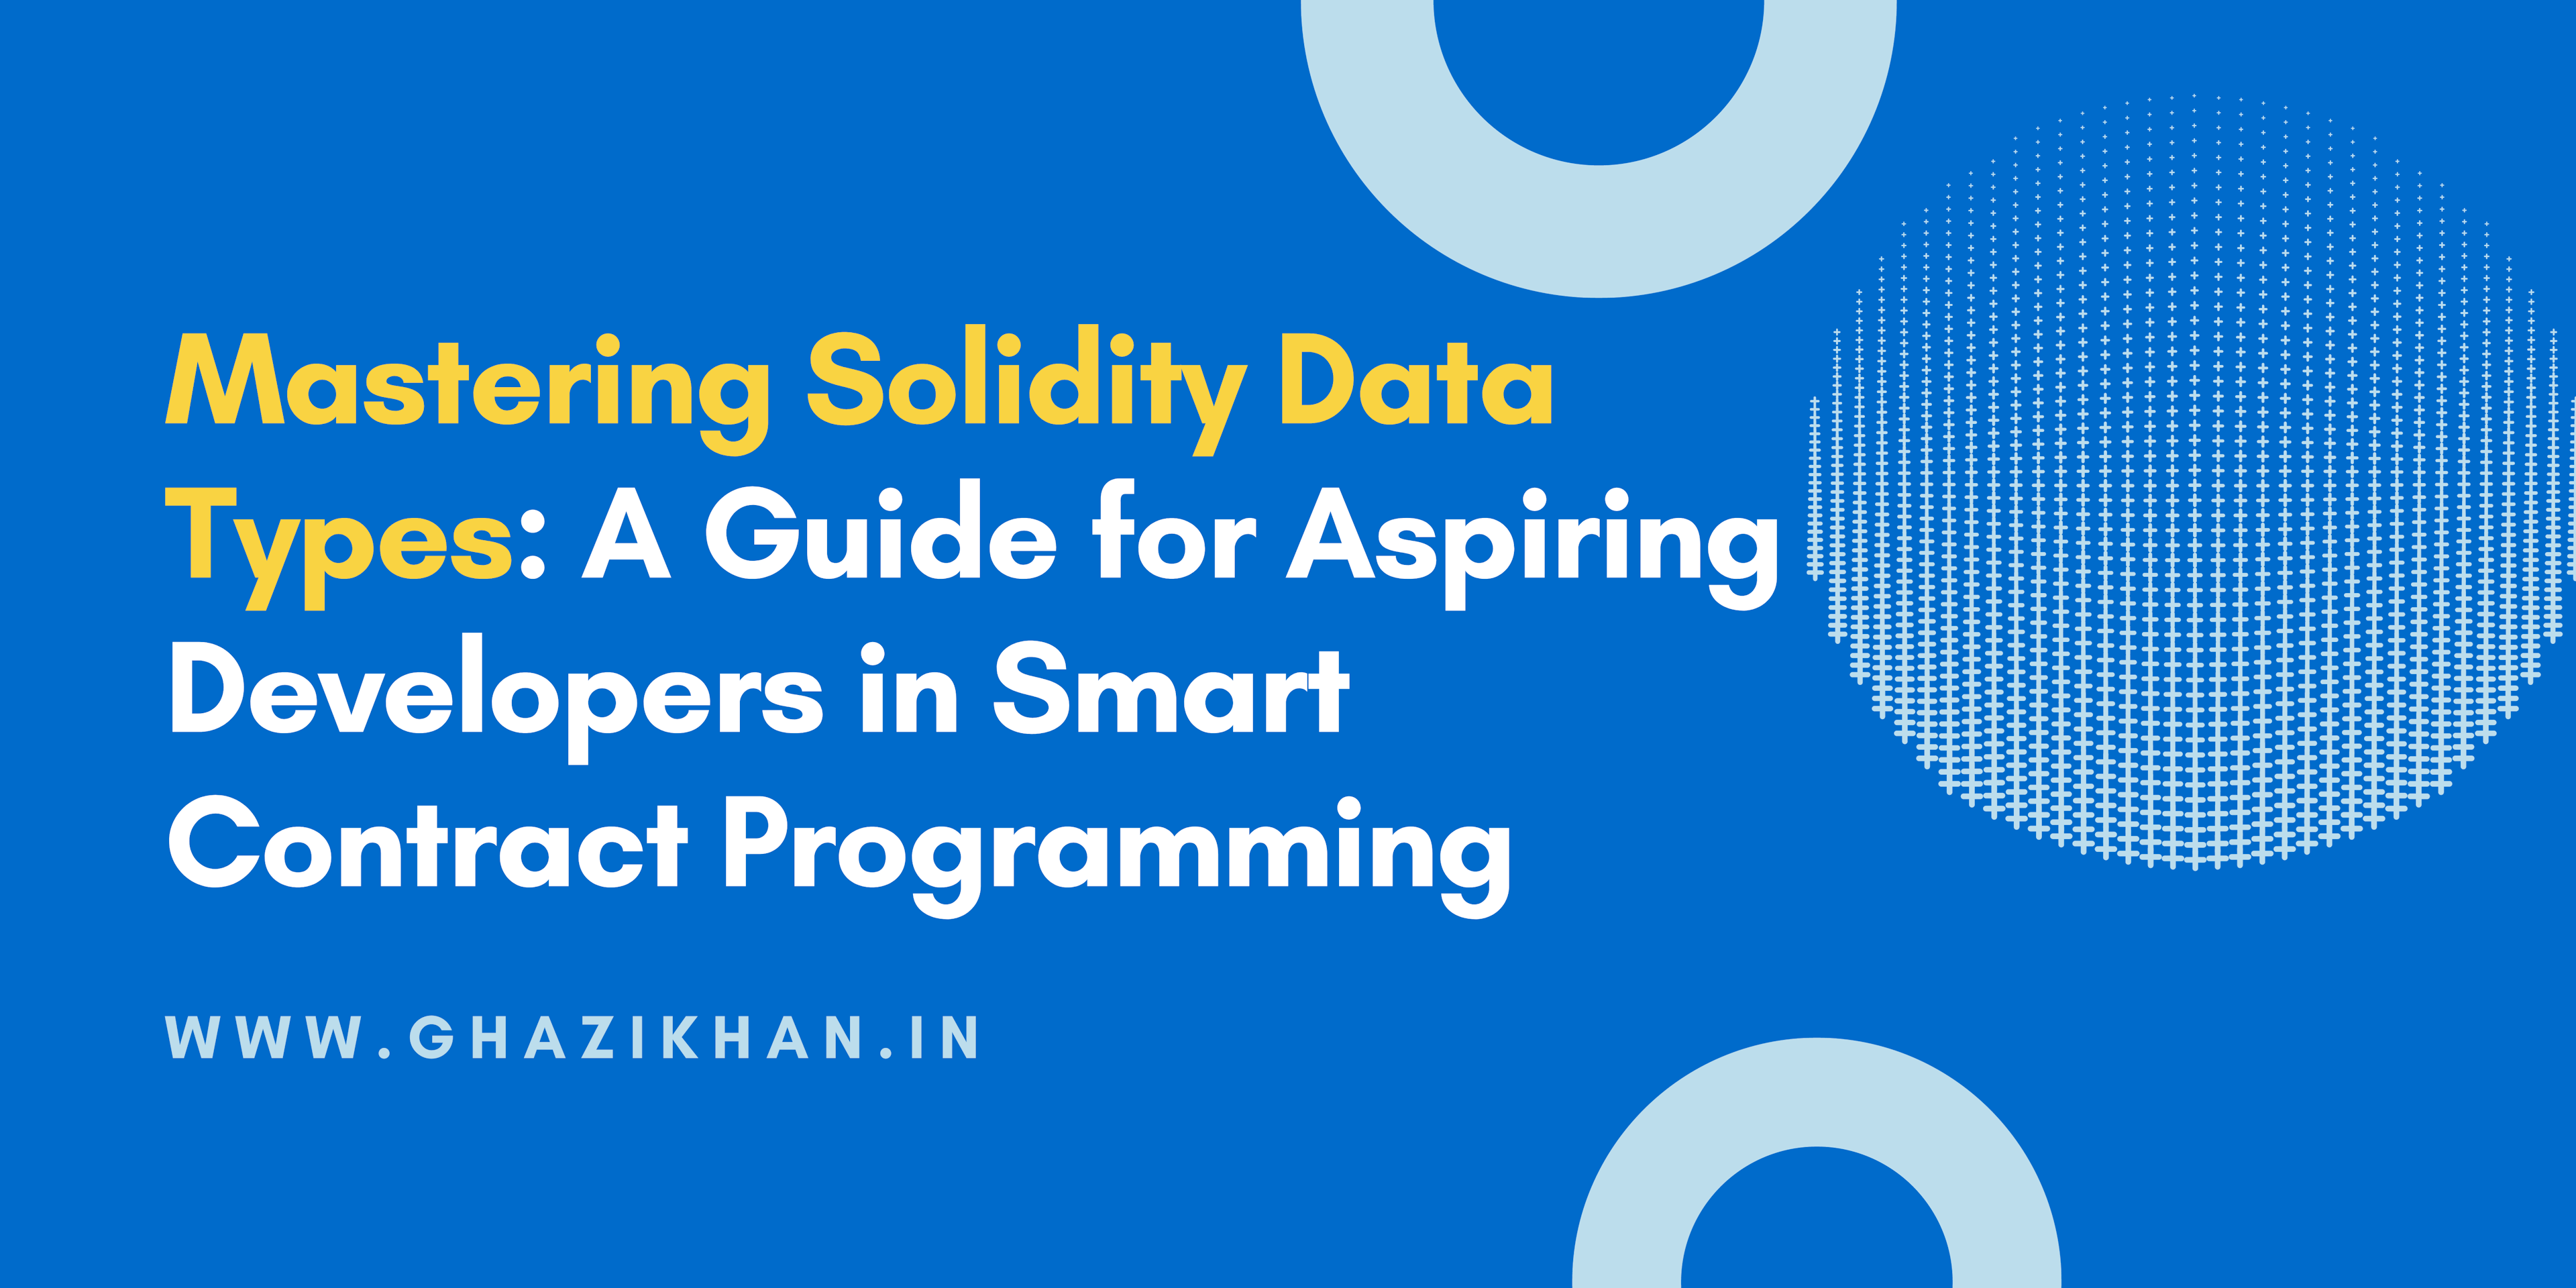 Mastering Solidity Data Types: A Guide for Aspiring Developers in Smart Contract Programming